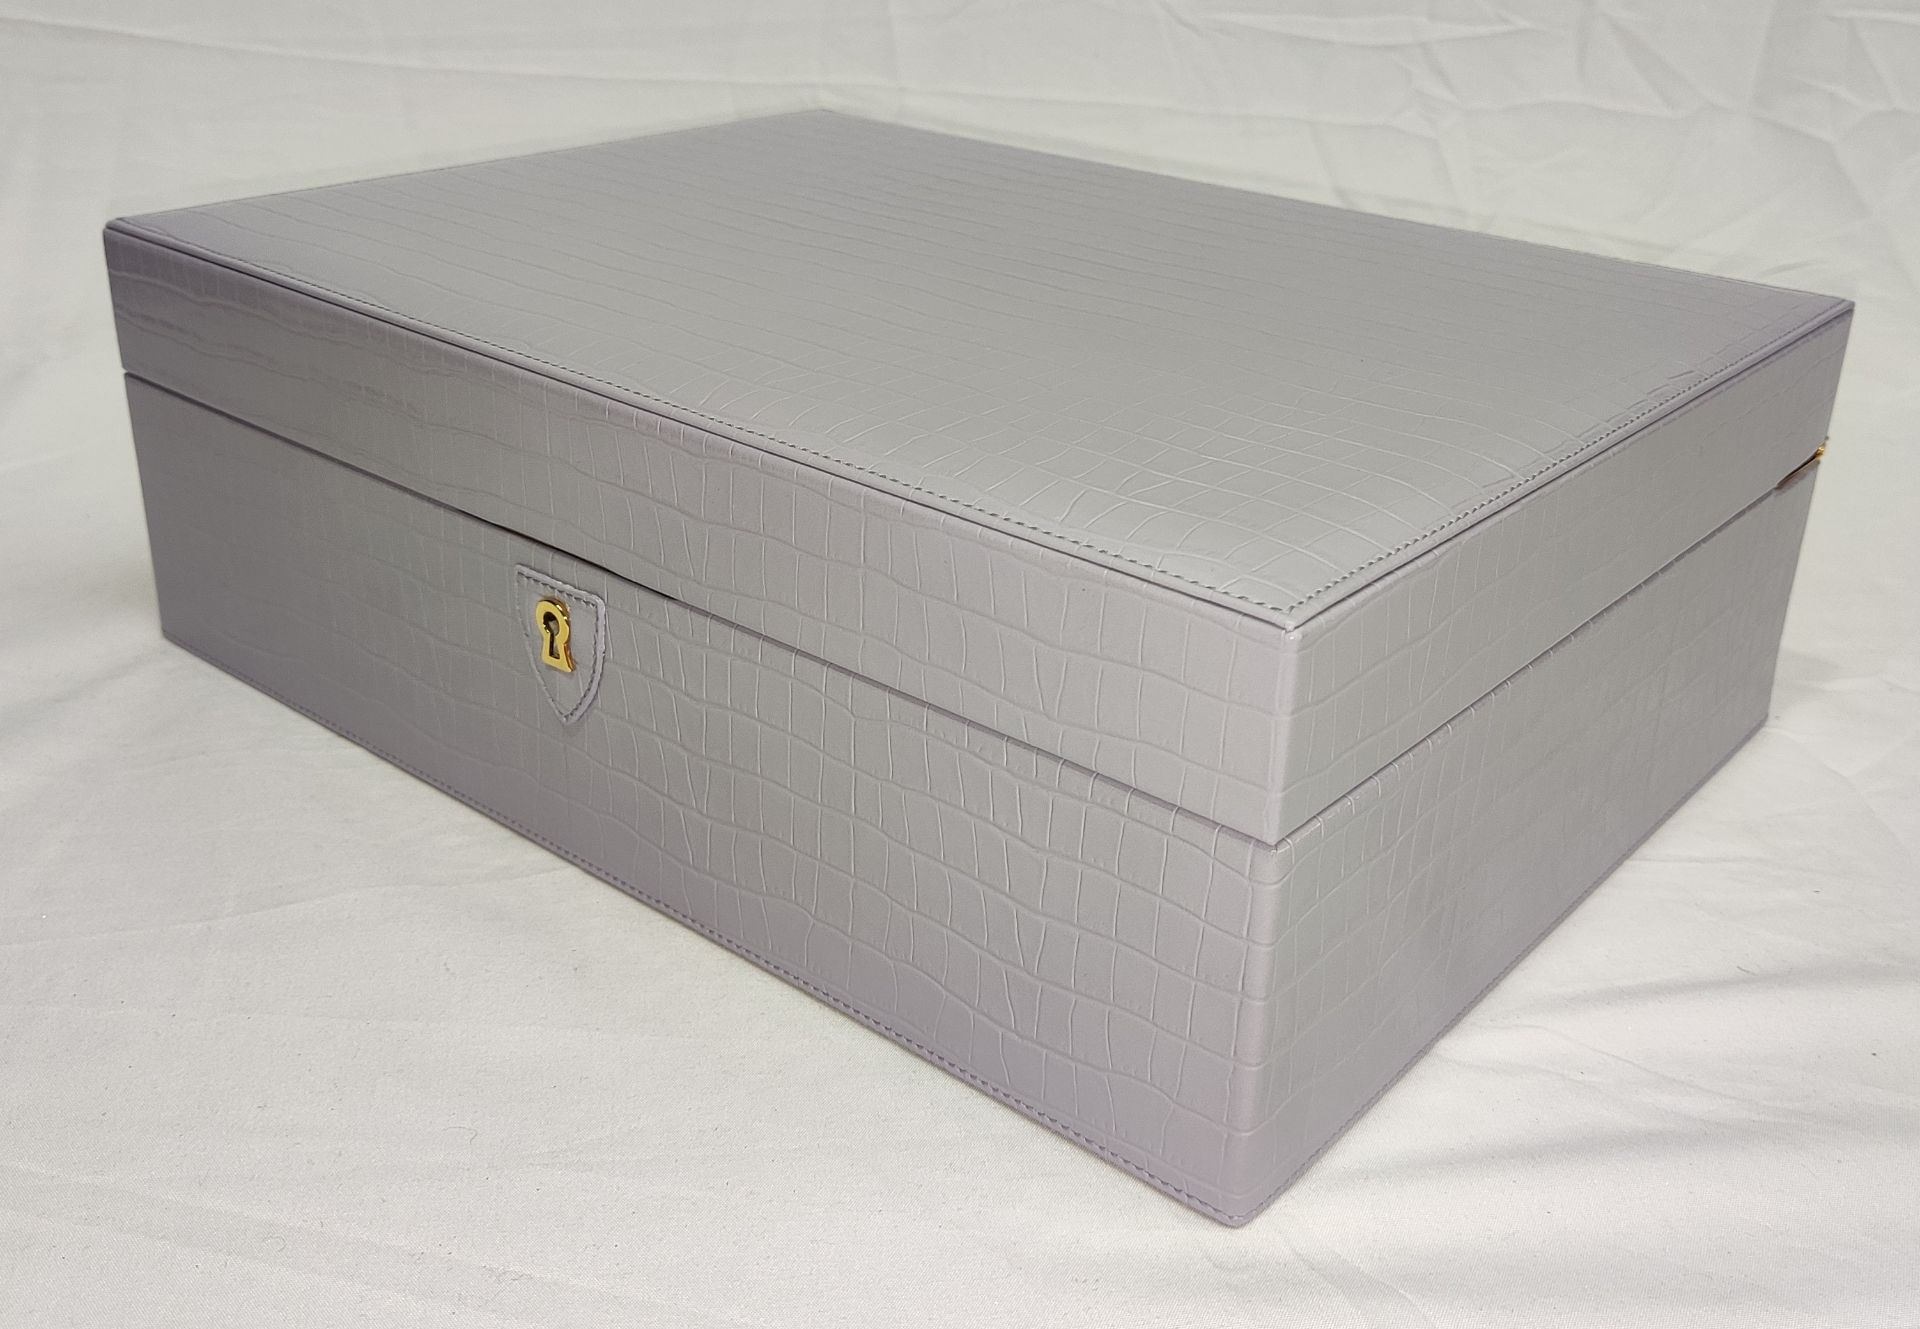 1 x ASPINAL OF LONDON Grand Luxe Jewellery Case In Deep Shine English Lavender Croc - Original - Image 25 of 34